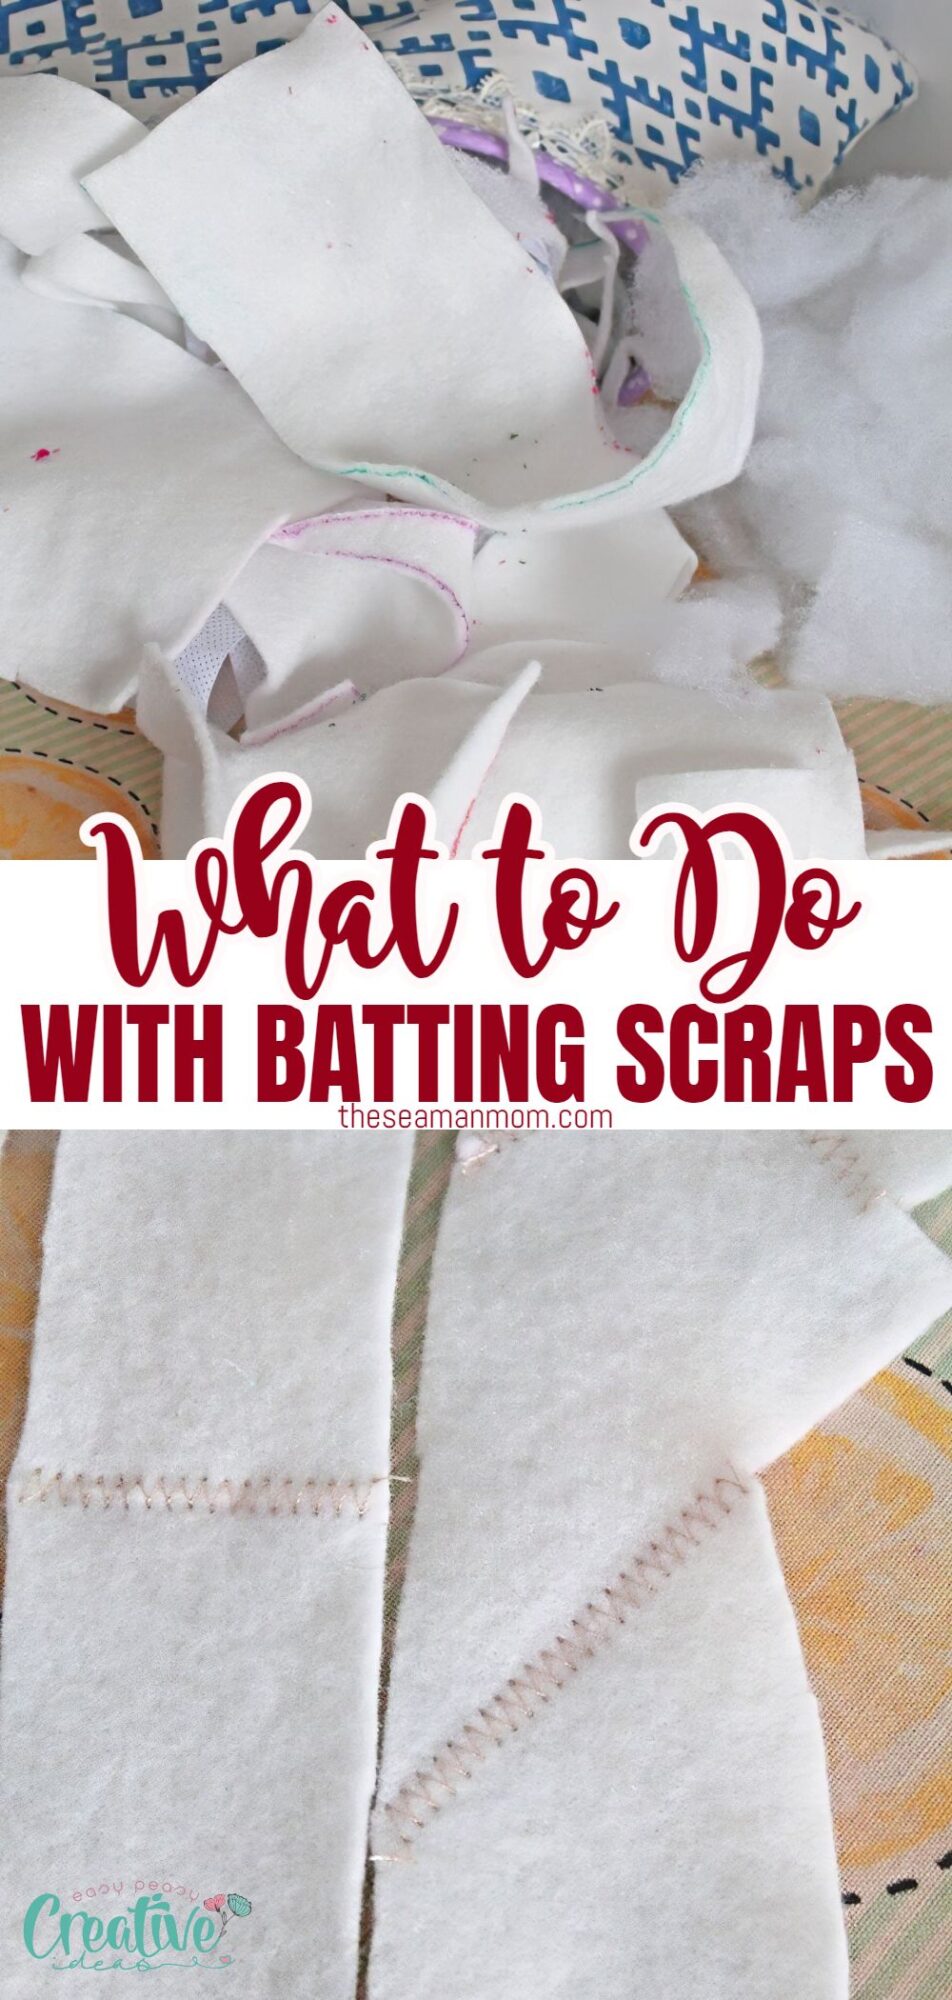 Transform batting scraps into beautiful creations! Here's what to do with batting scraps!